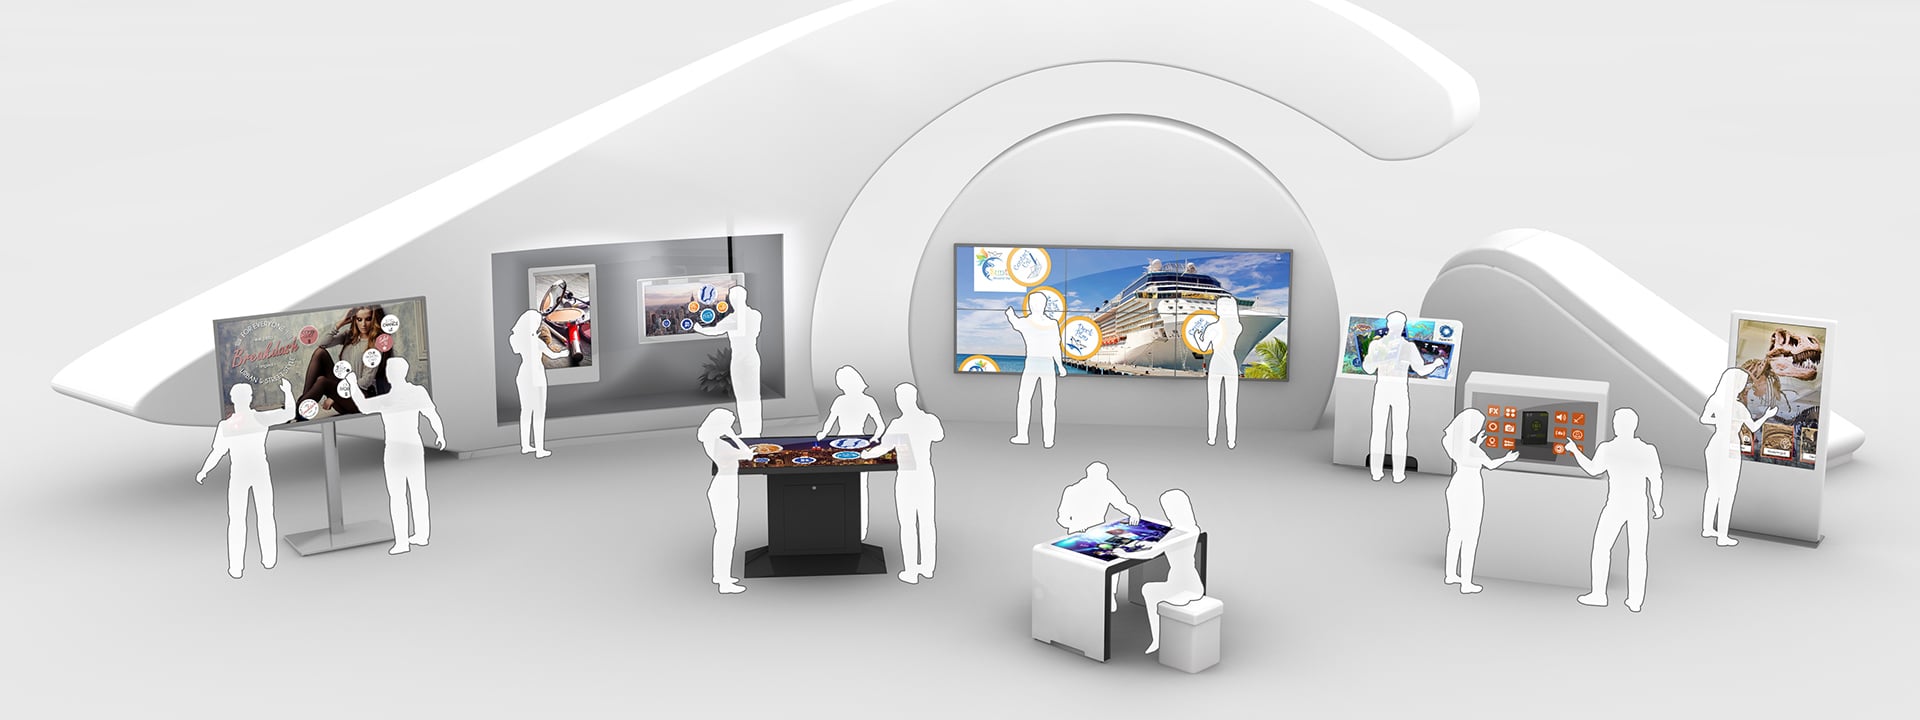 Multi touch screen software for Travel, Tourism, Infocenter